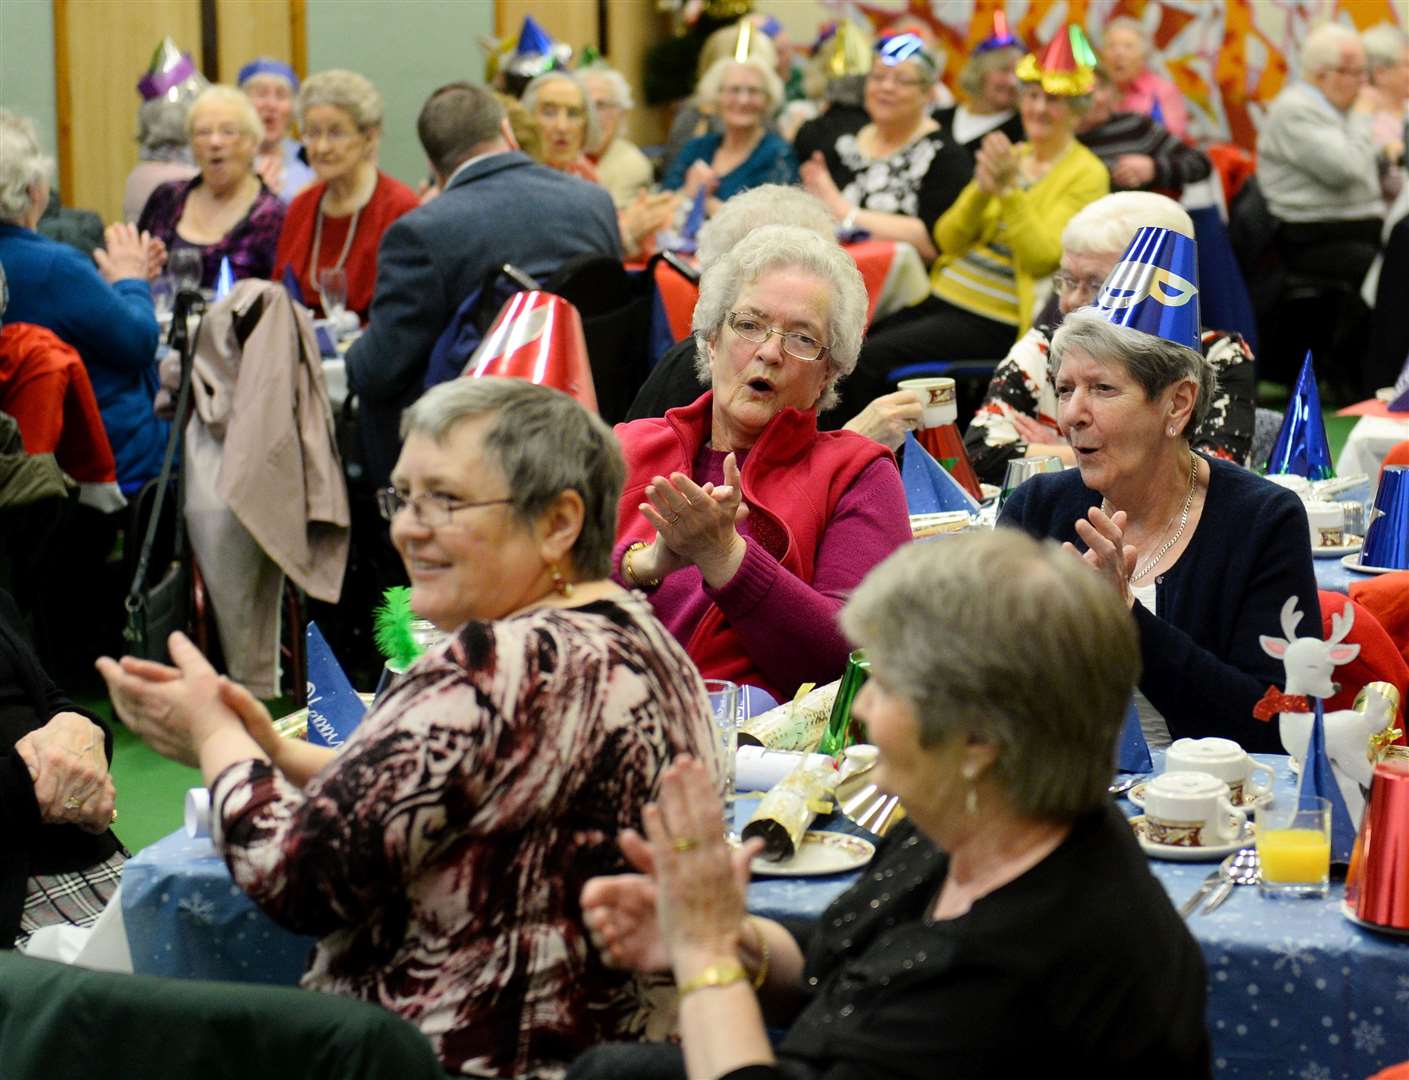 Dalneigh Pensioners Christmas Dinner: Singing along to christmas songs. Picture: Gary Anthony.